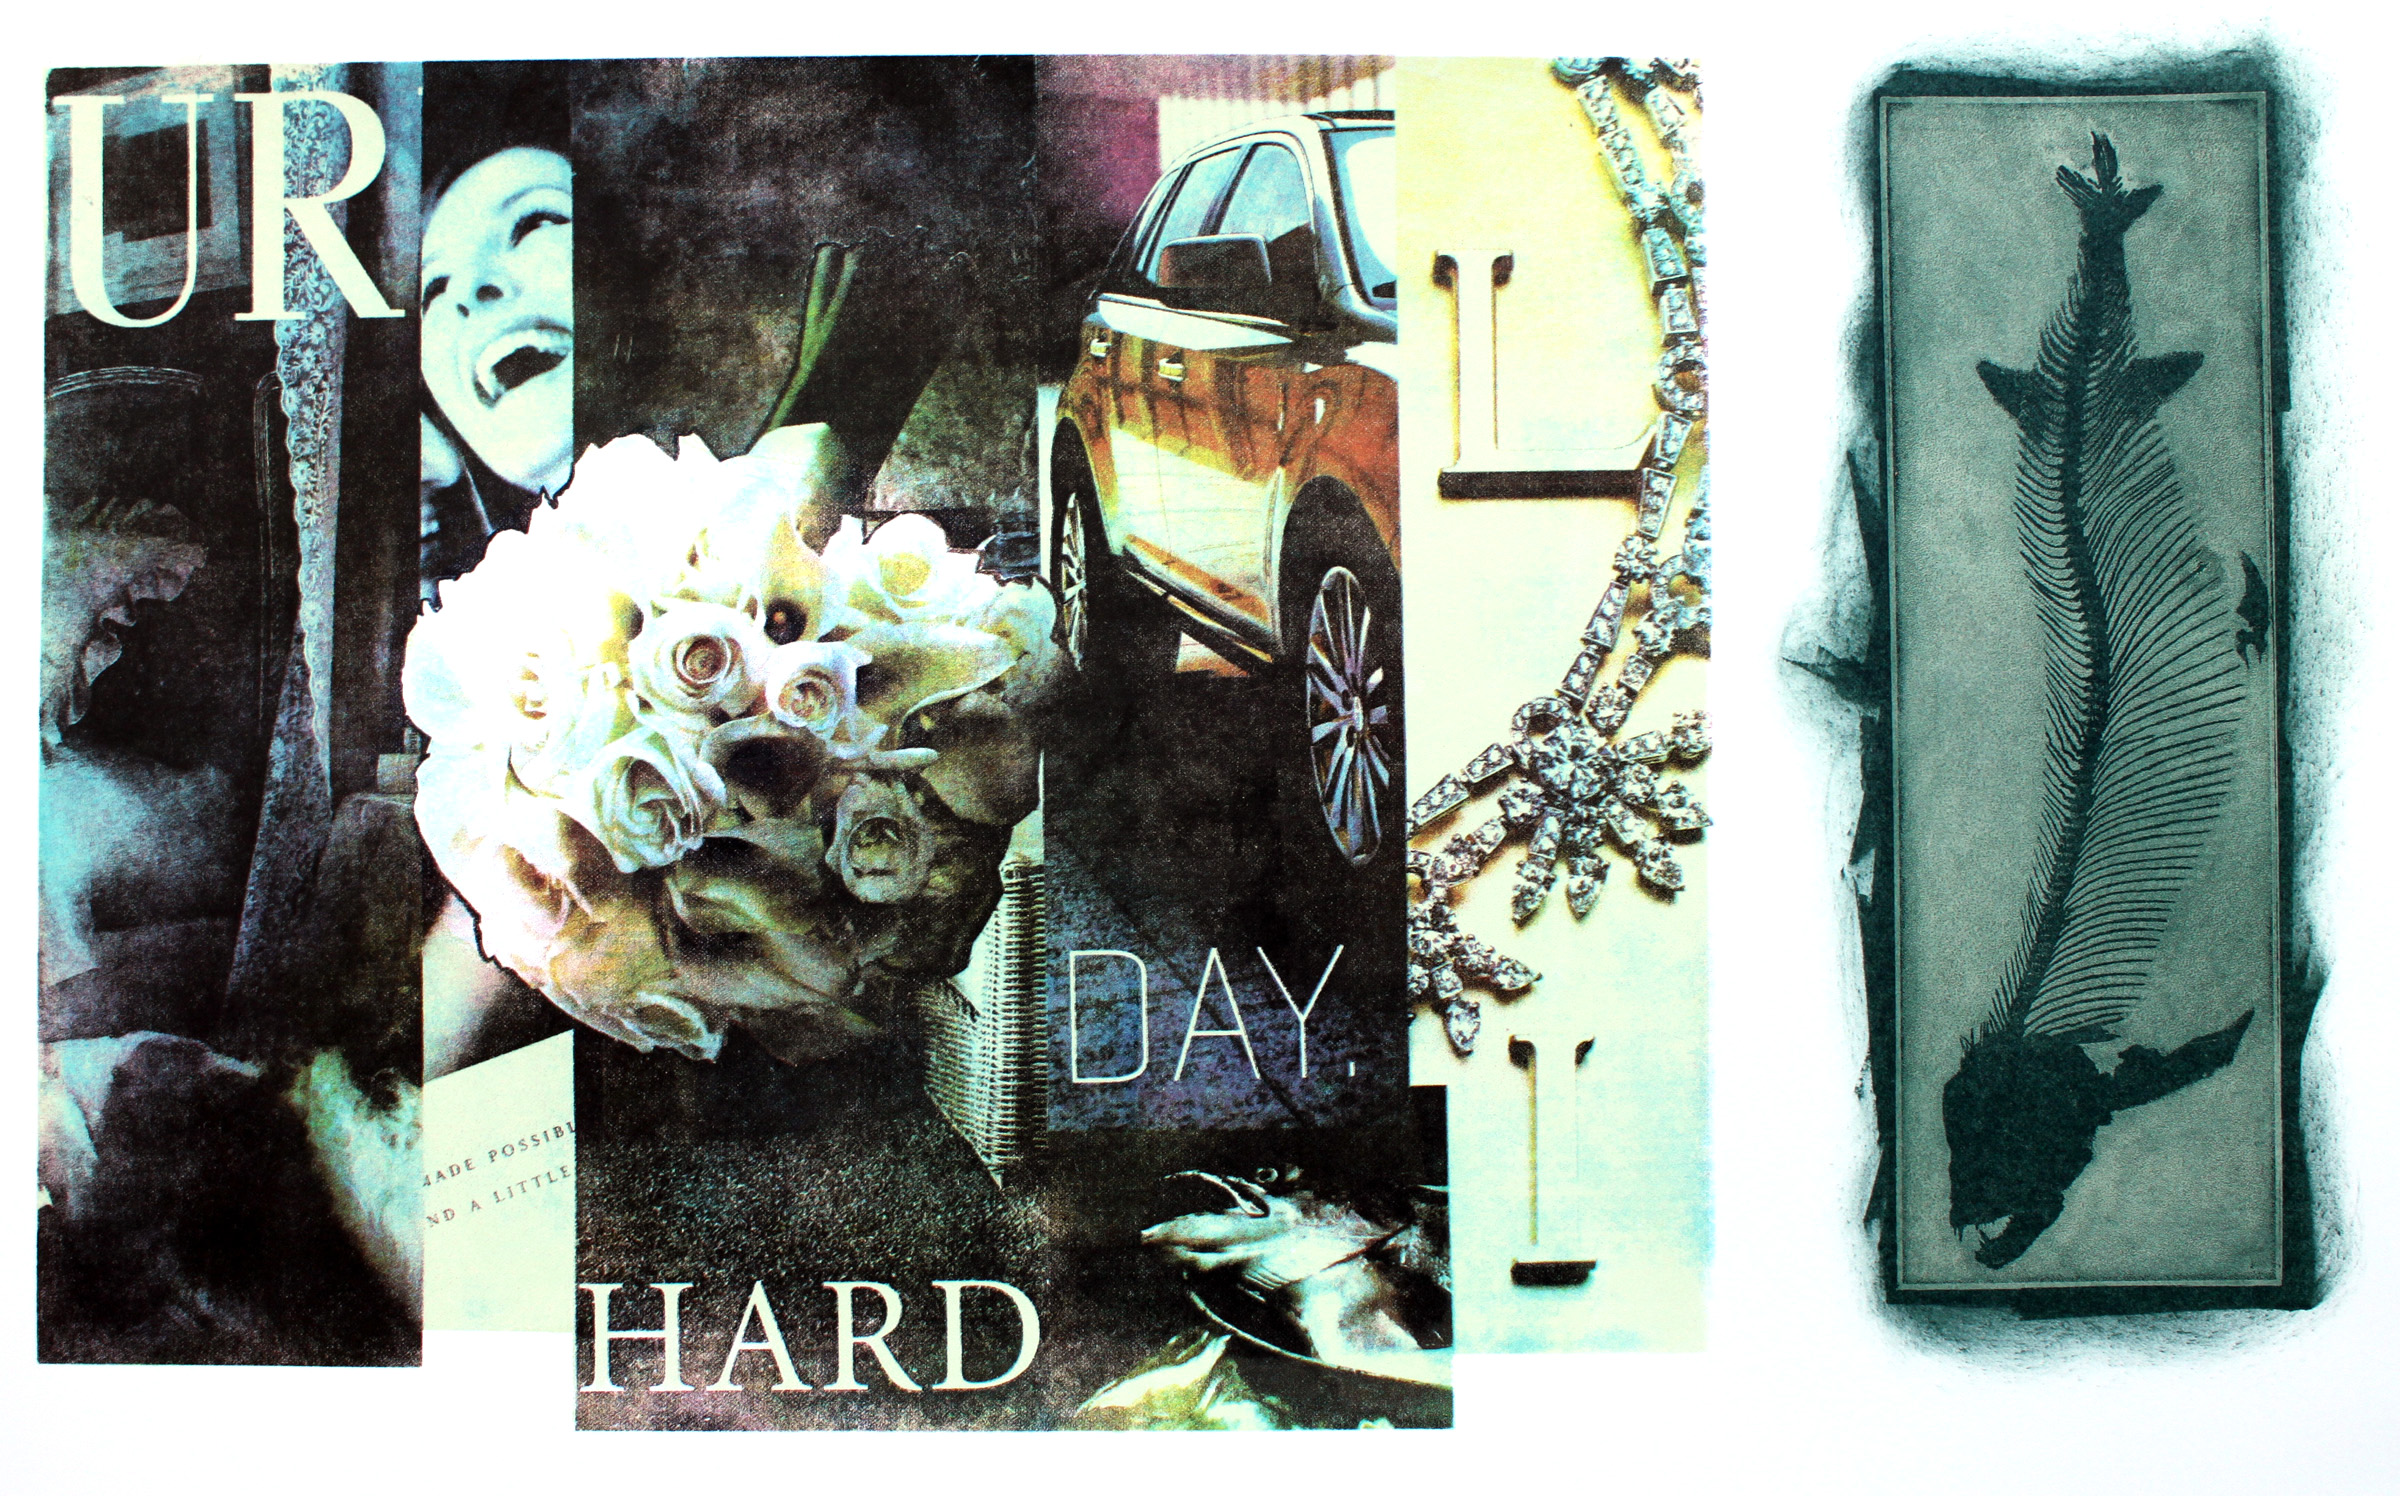 Bands of photos sampled from advertising are paired with the text "Ur Hard Day" and the fossilized skeleton of a fish